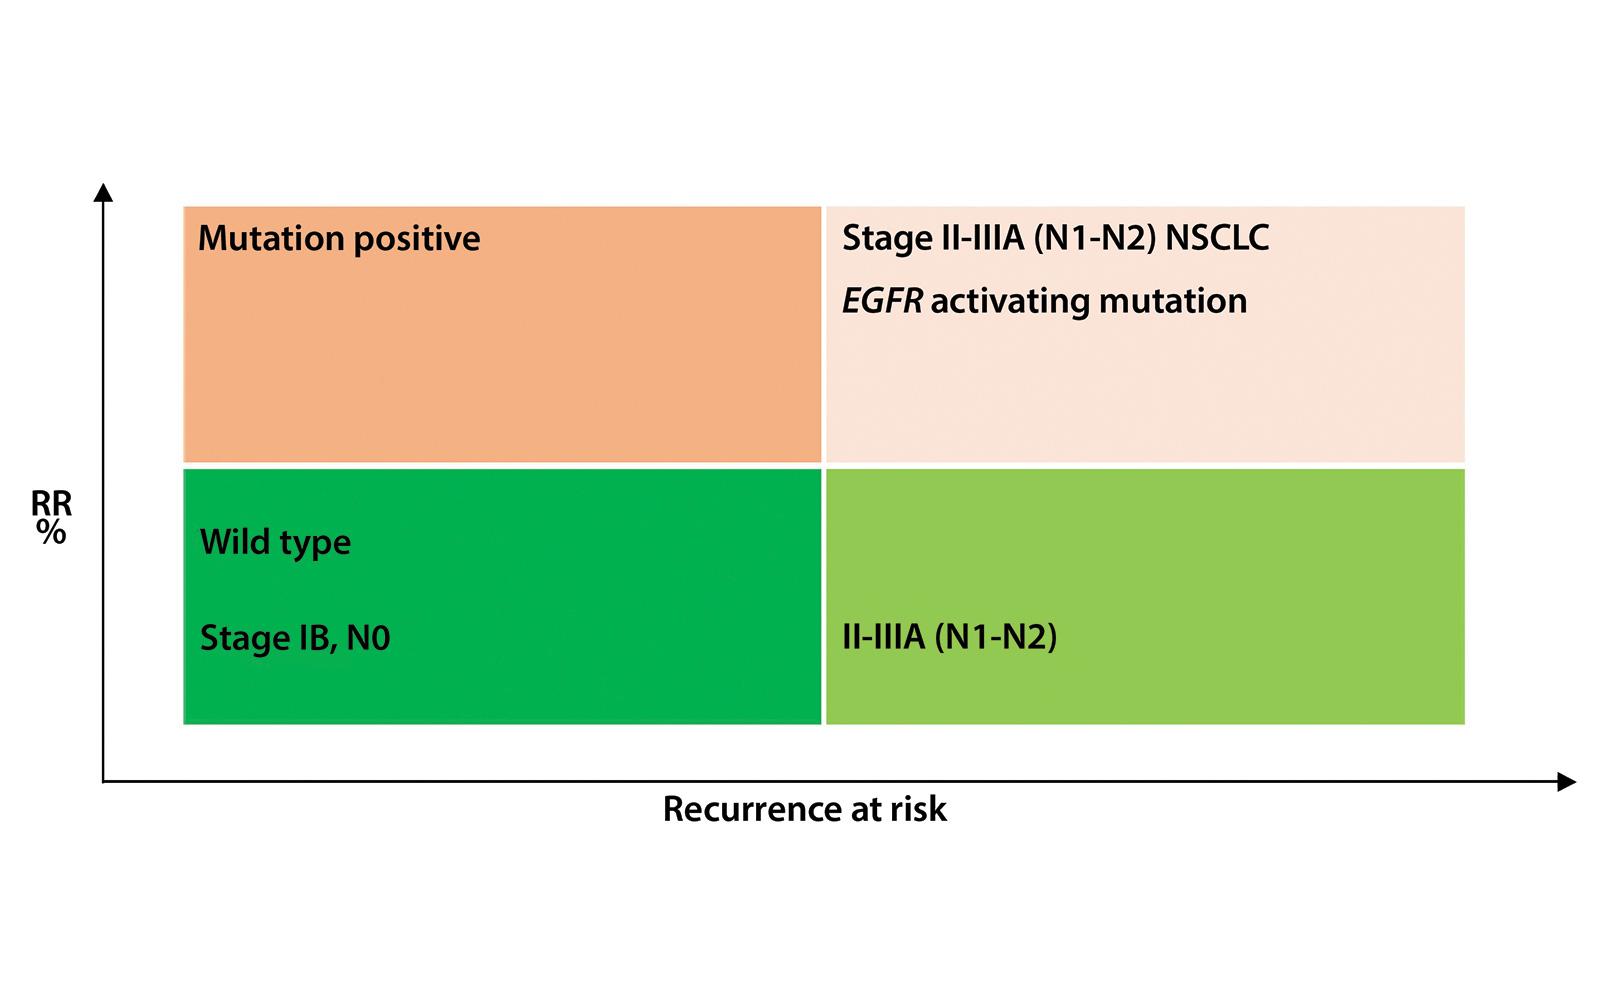 Adjuvant EGFR-TKI for Resected NSCLC: Who, When, and Where?